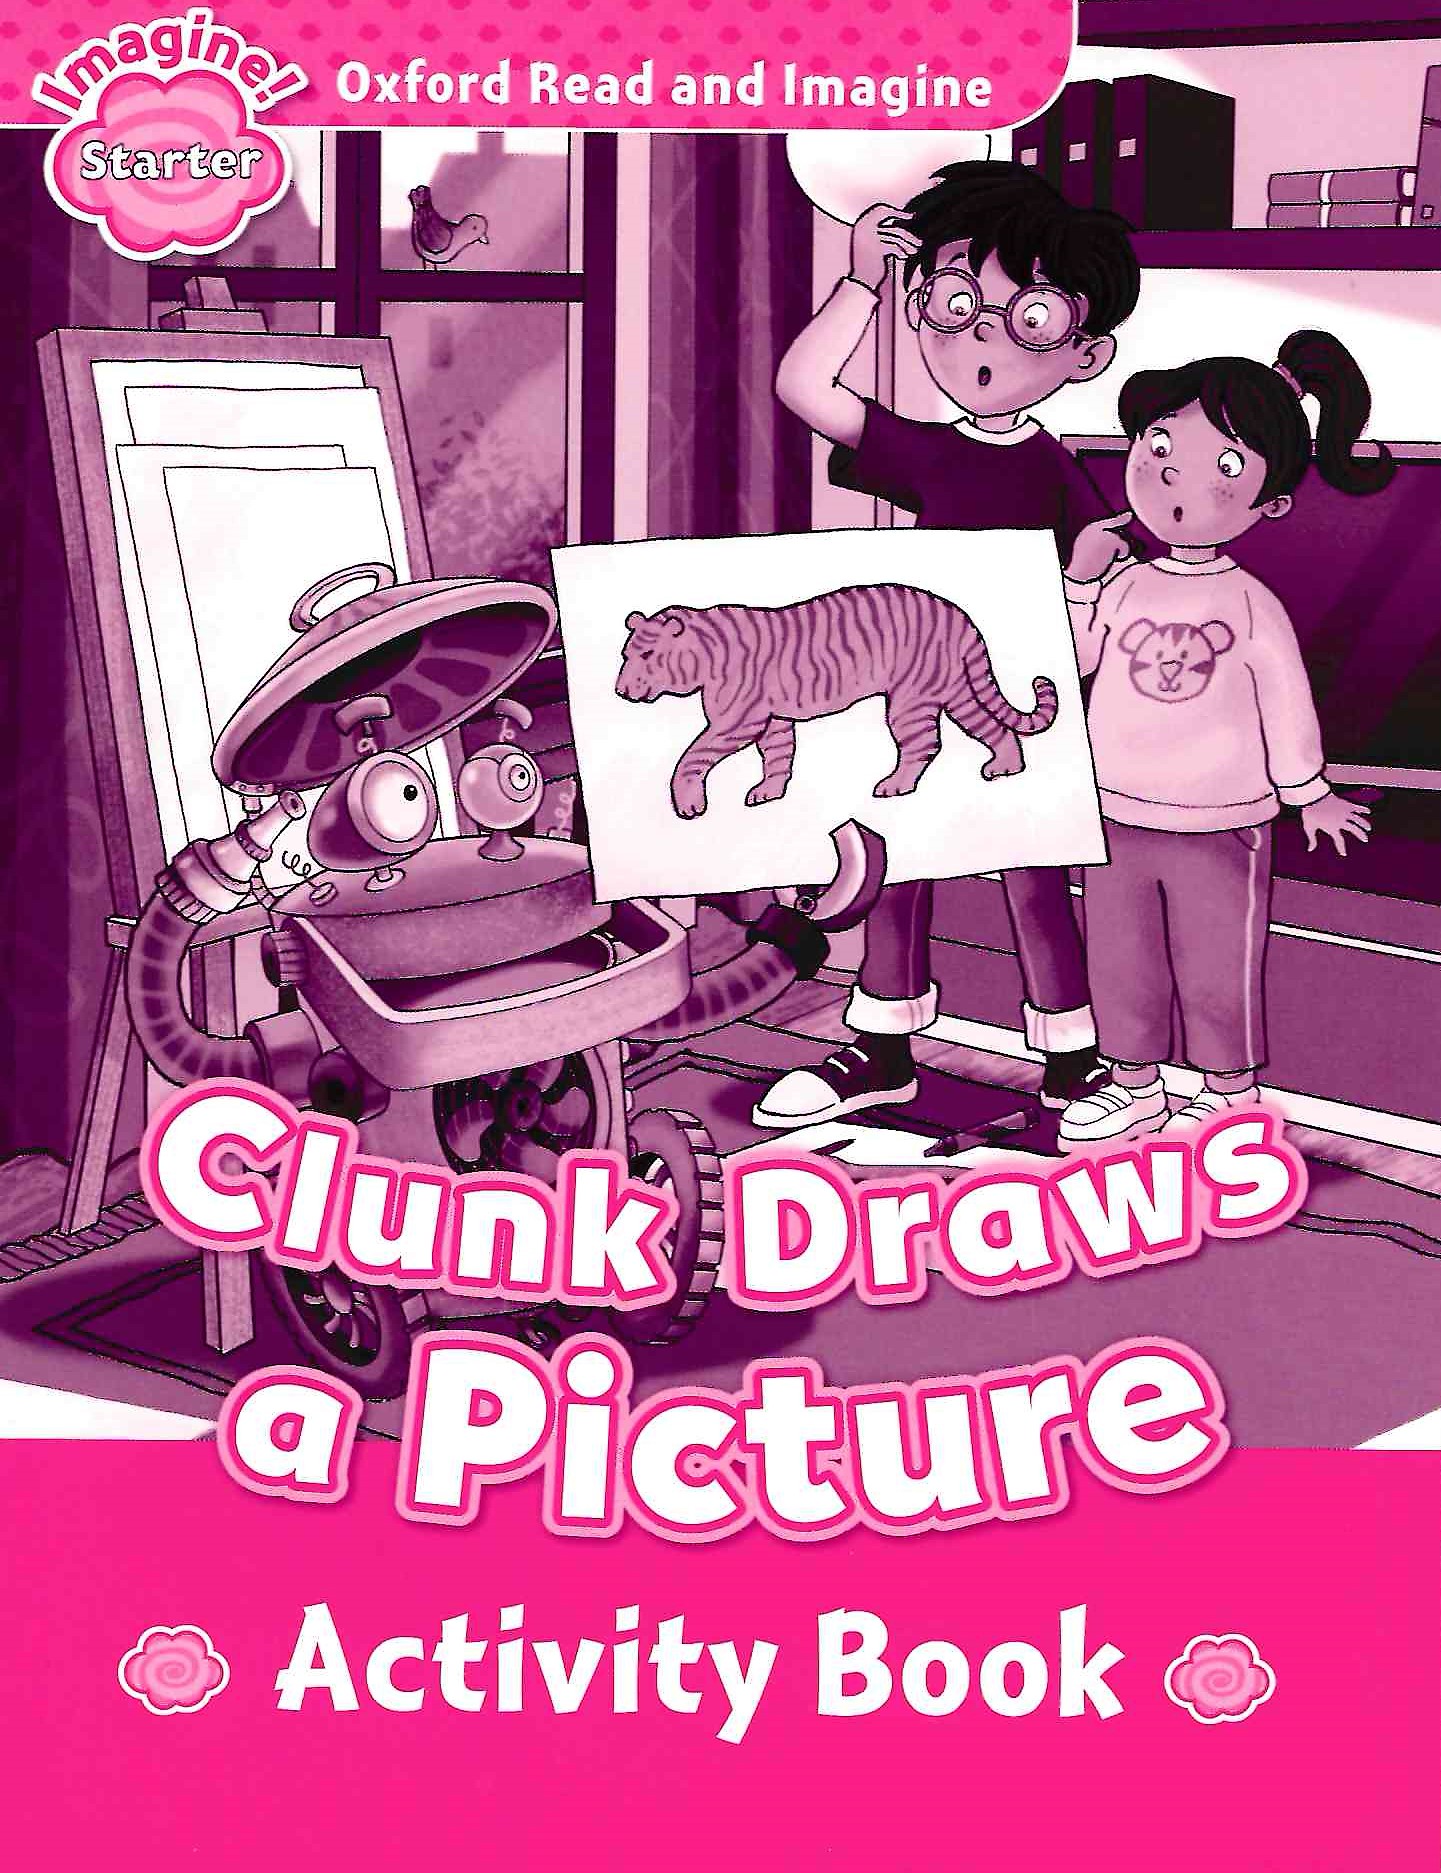 Clunk Draws a Picture Activity Book